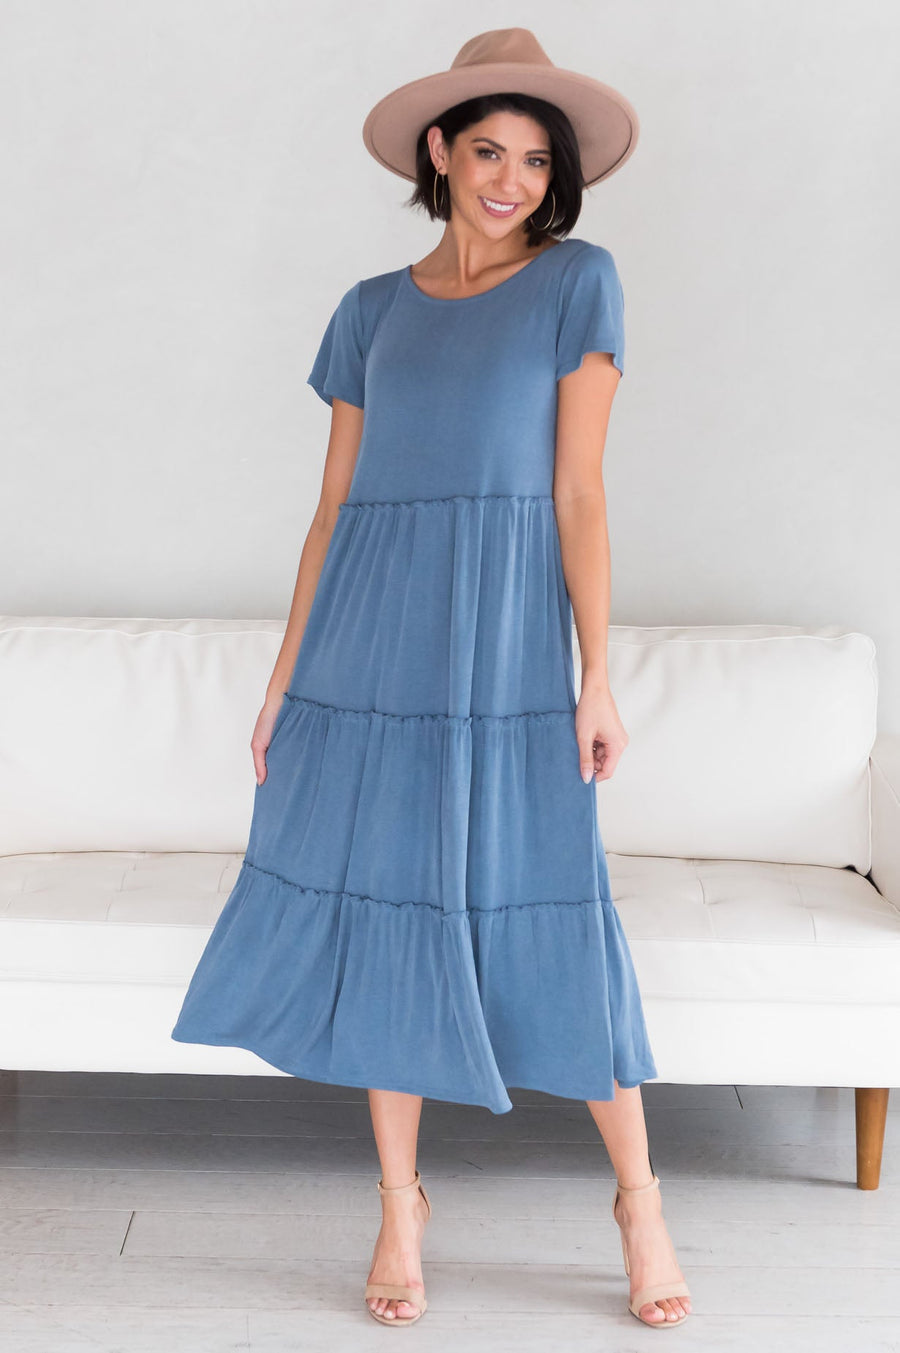 Modest Dress, Skirt, and Top Restocks | Nee See's Dresses Page 3 ...